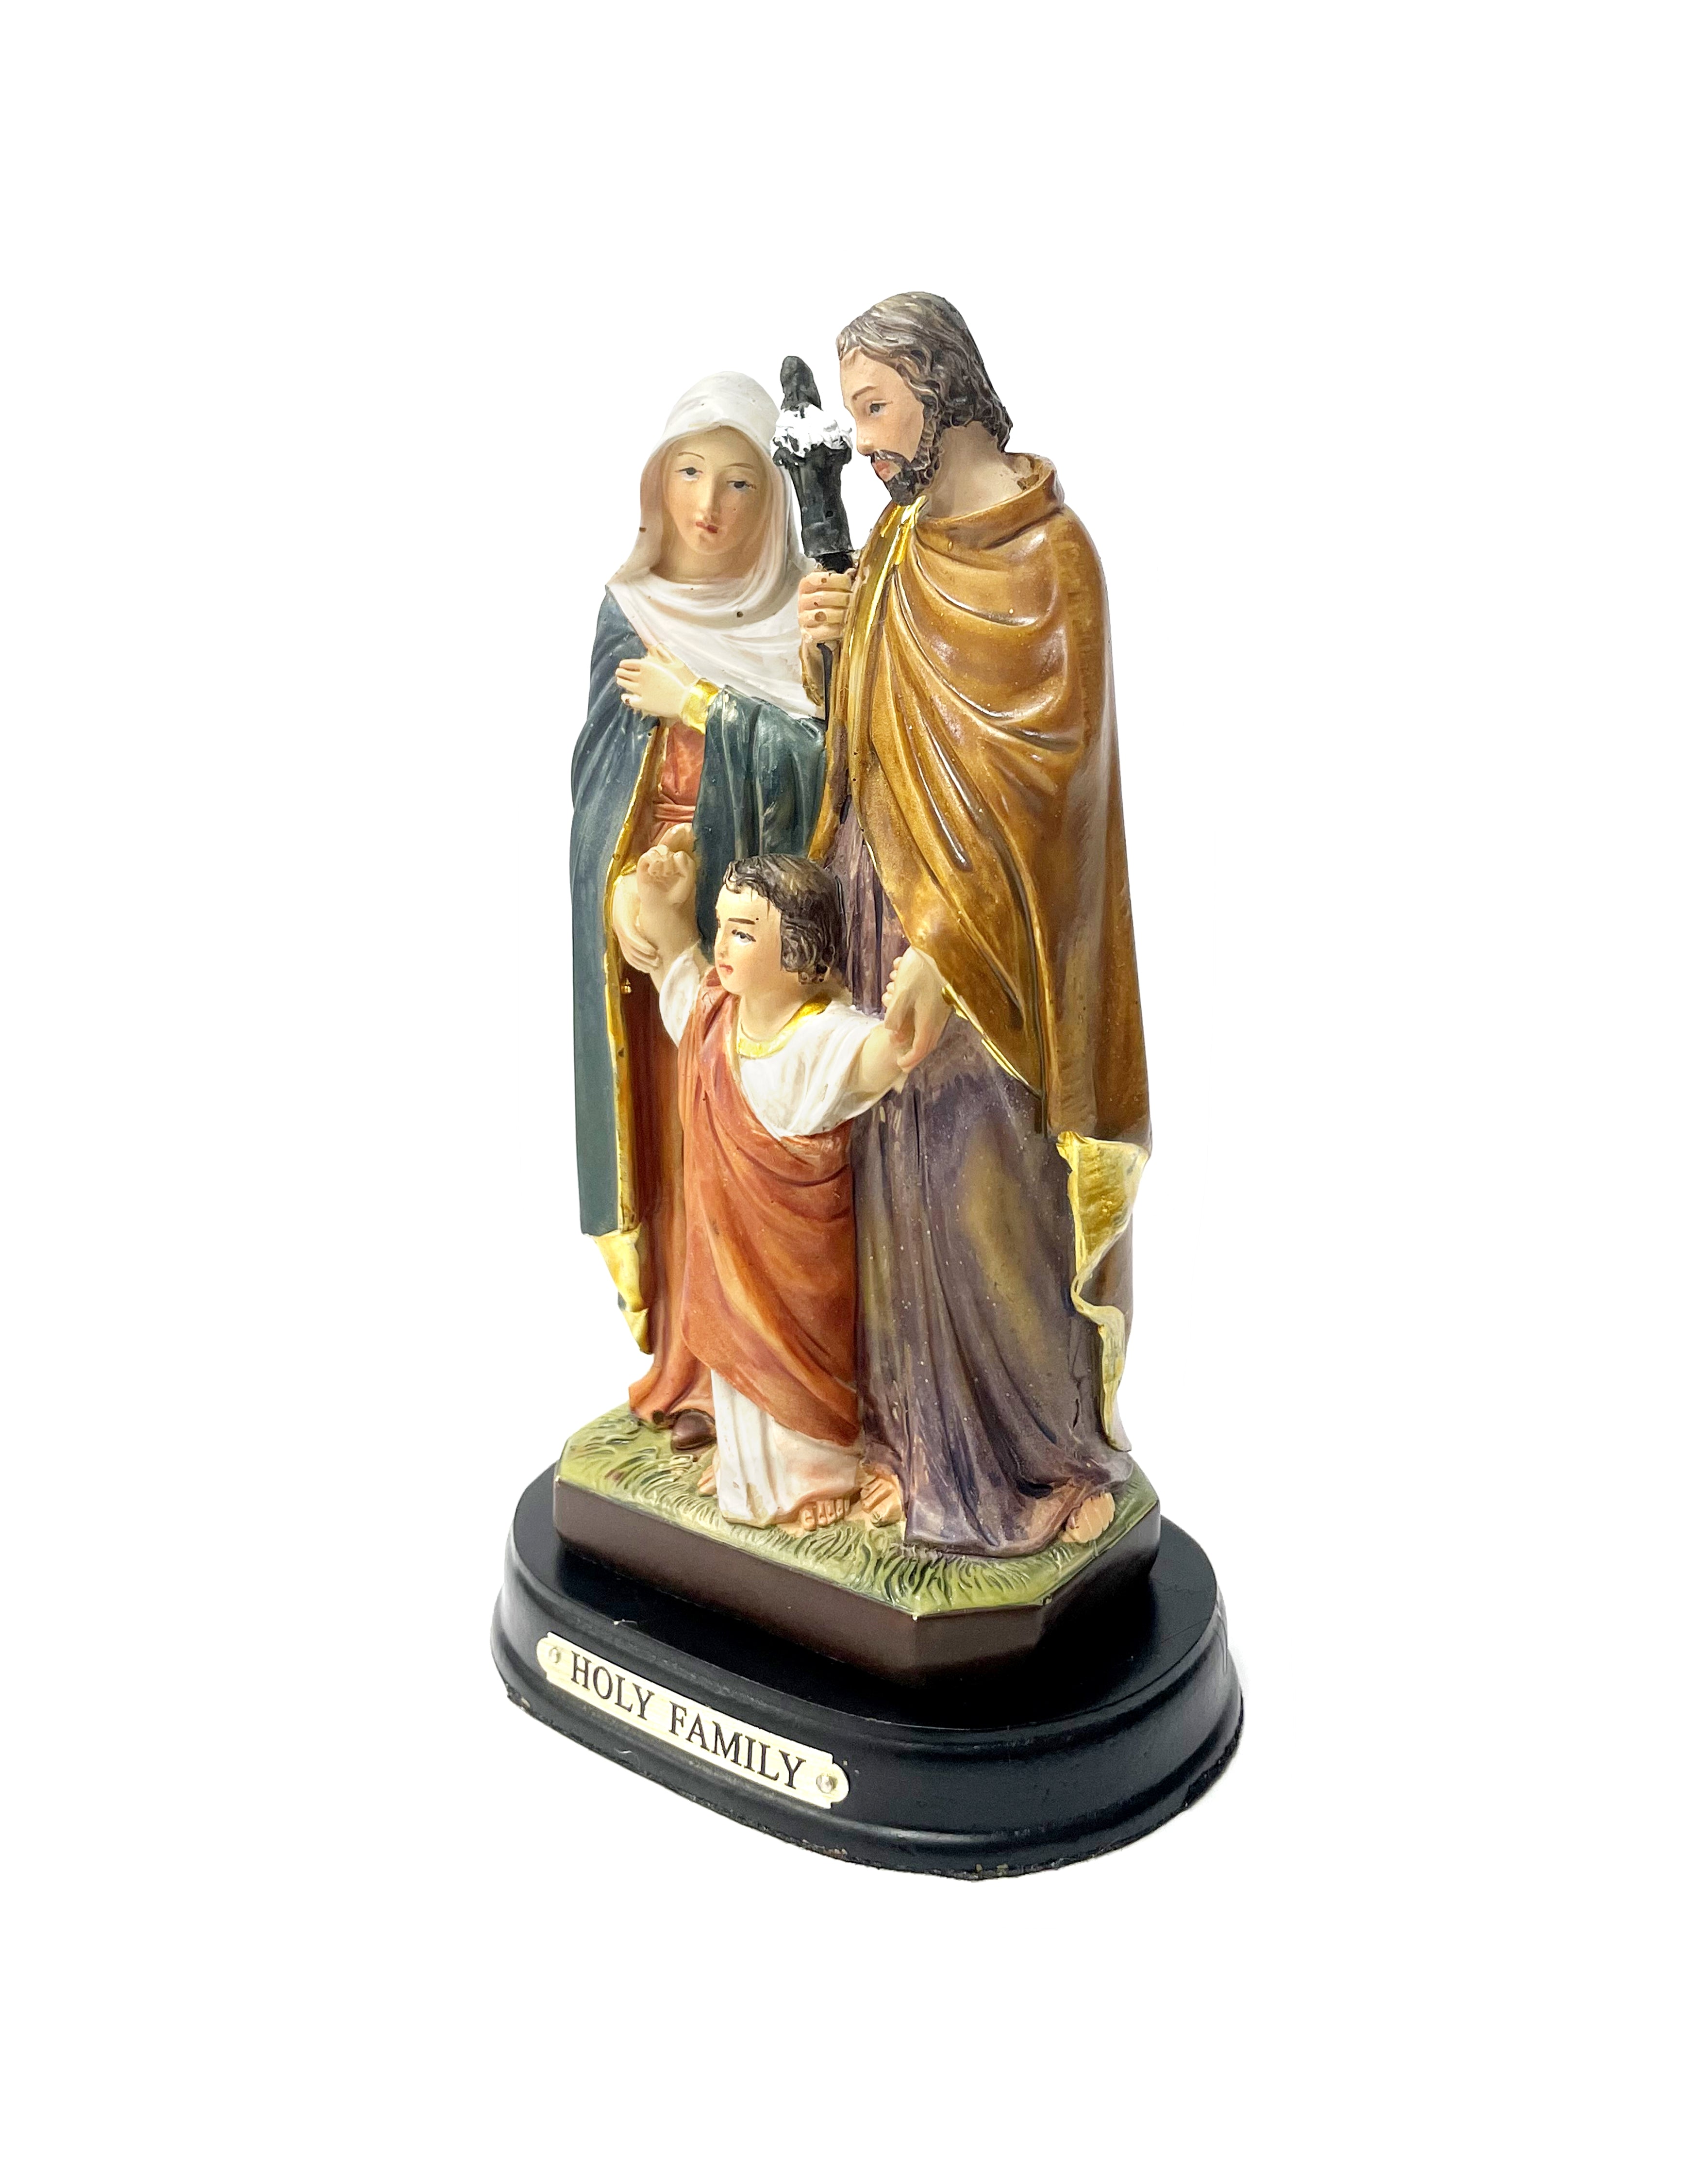 Religious statue of Holy Family 5" height